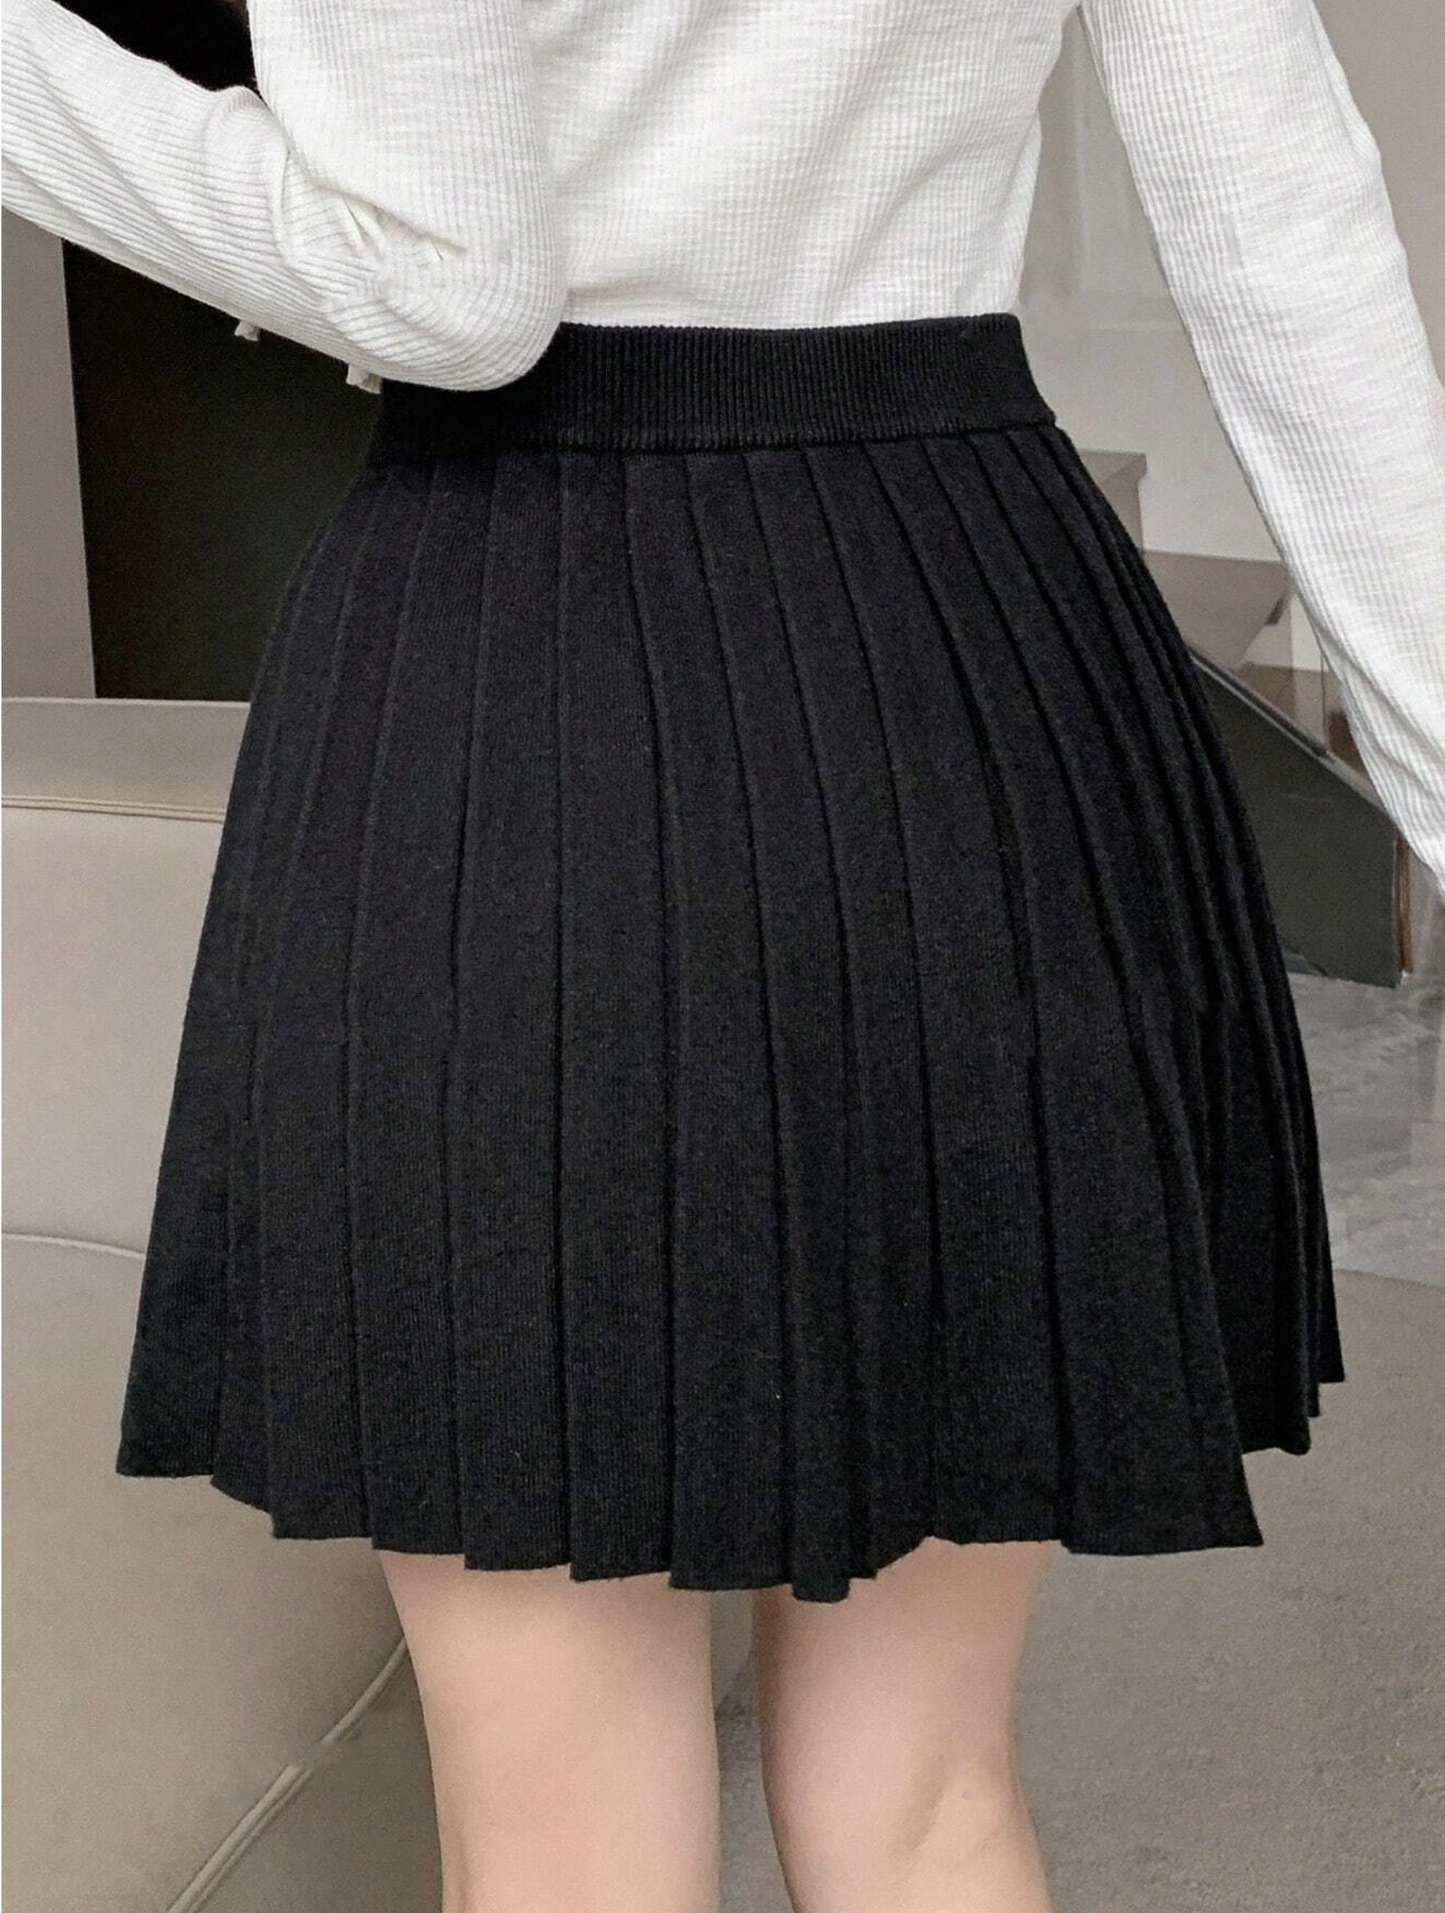 Cute Skirt♥ Pleated Knit Skirt 4 Colors